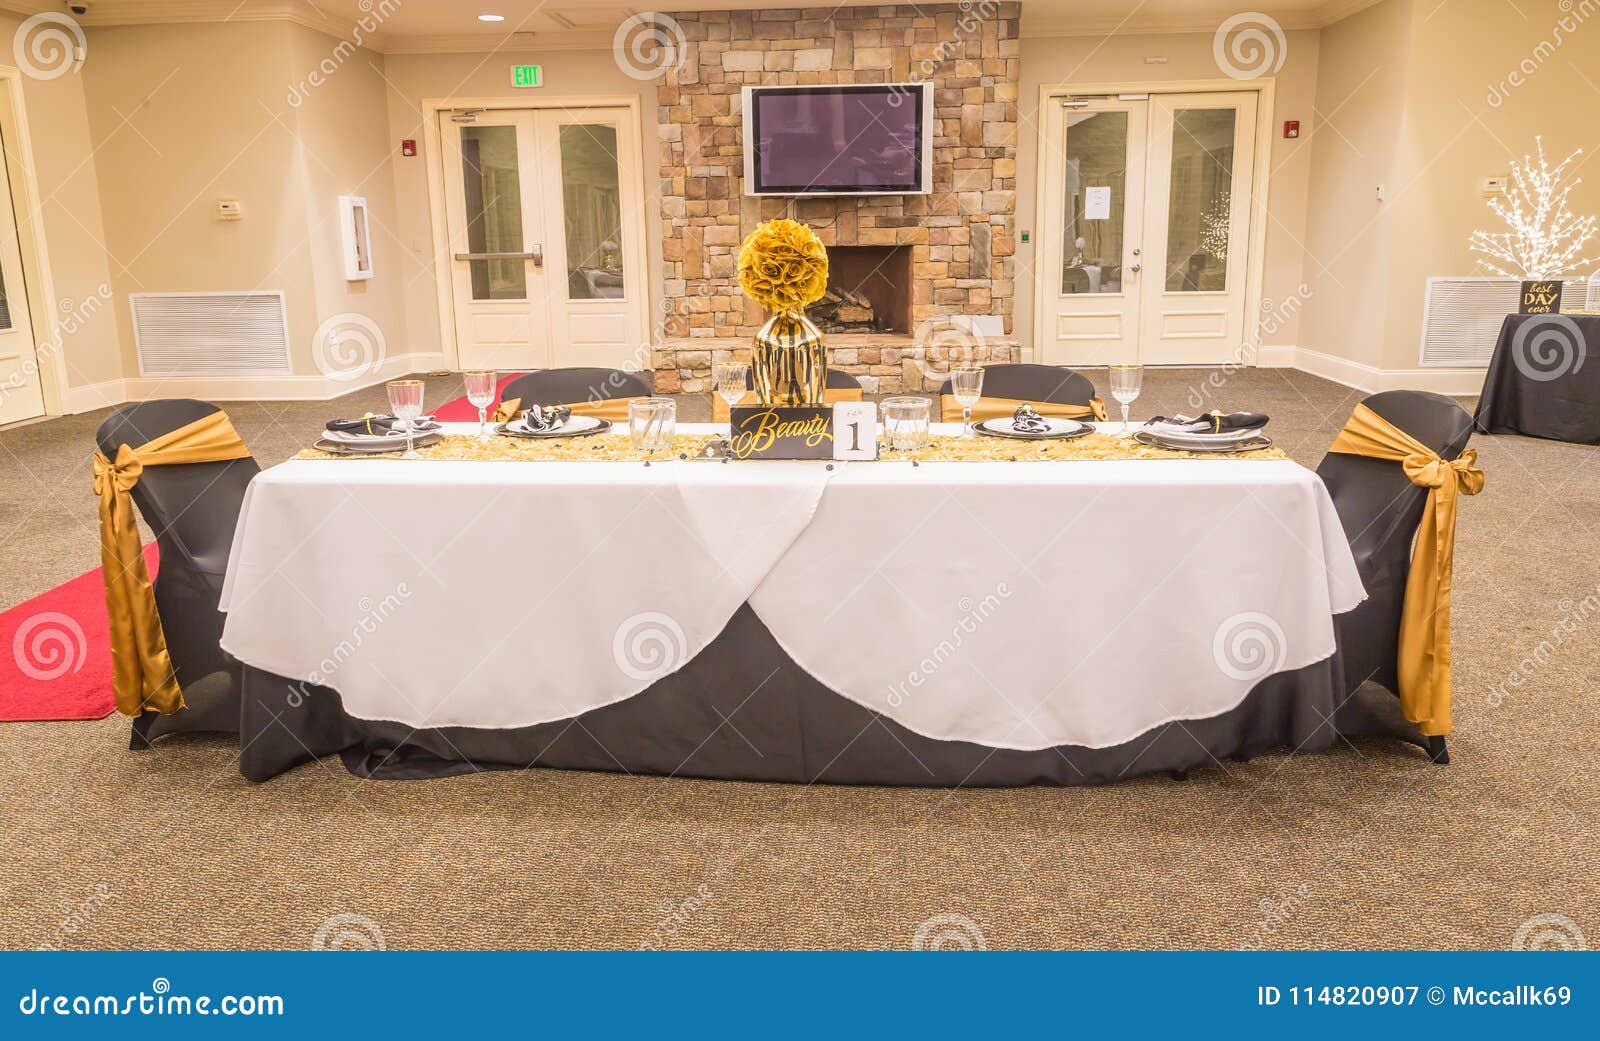 Banquet  Black and gold party decorations, Black gold party, Gold birthday  party